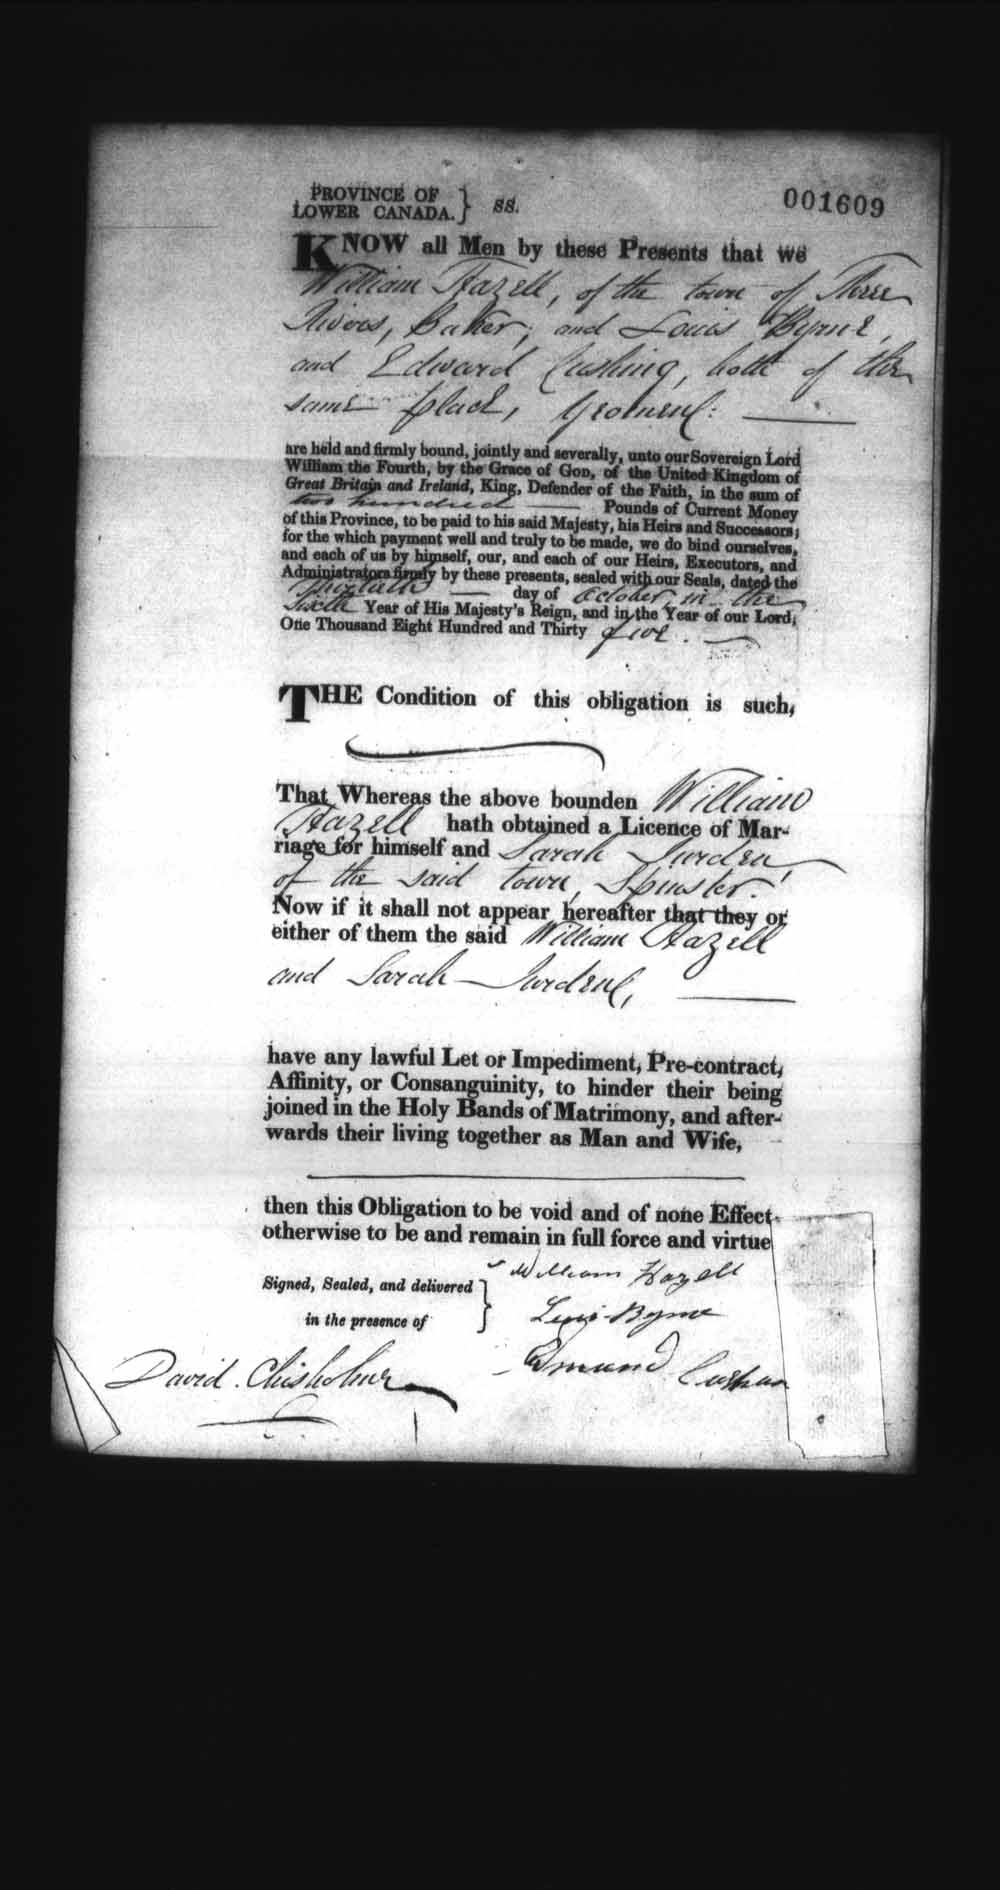 Digitized page of Upper and Lower Canada Marriage Bonds (1779-1865) for Image No.: e008237930